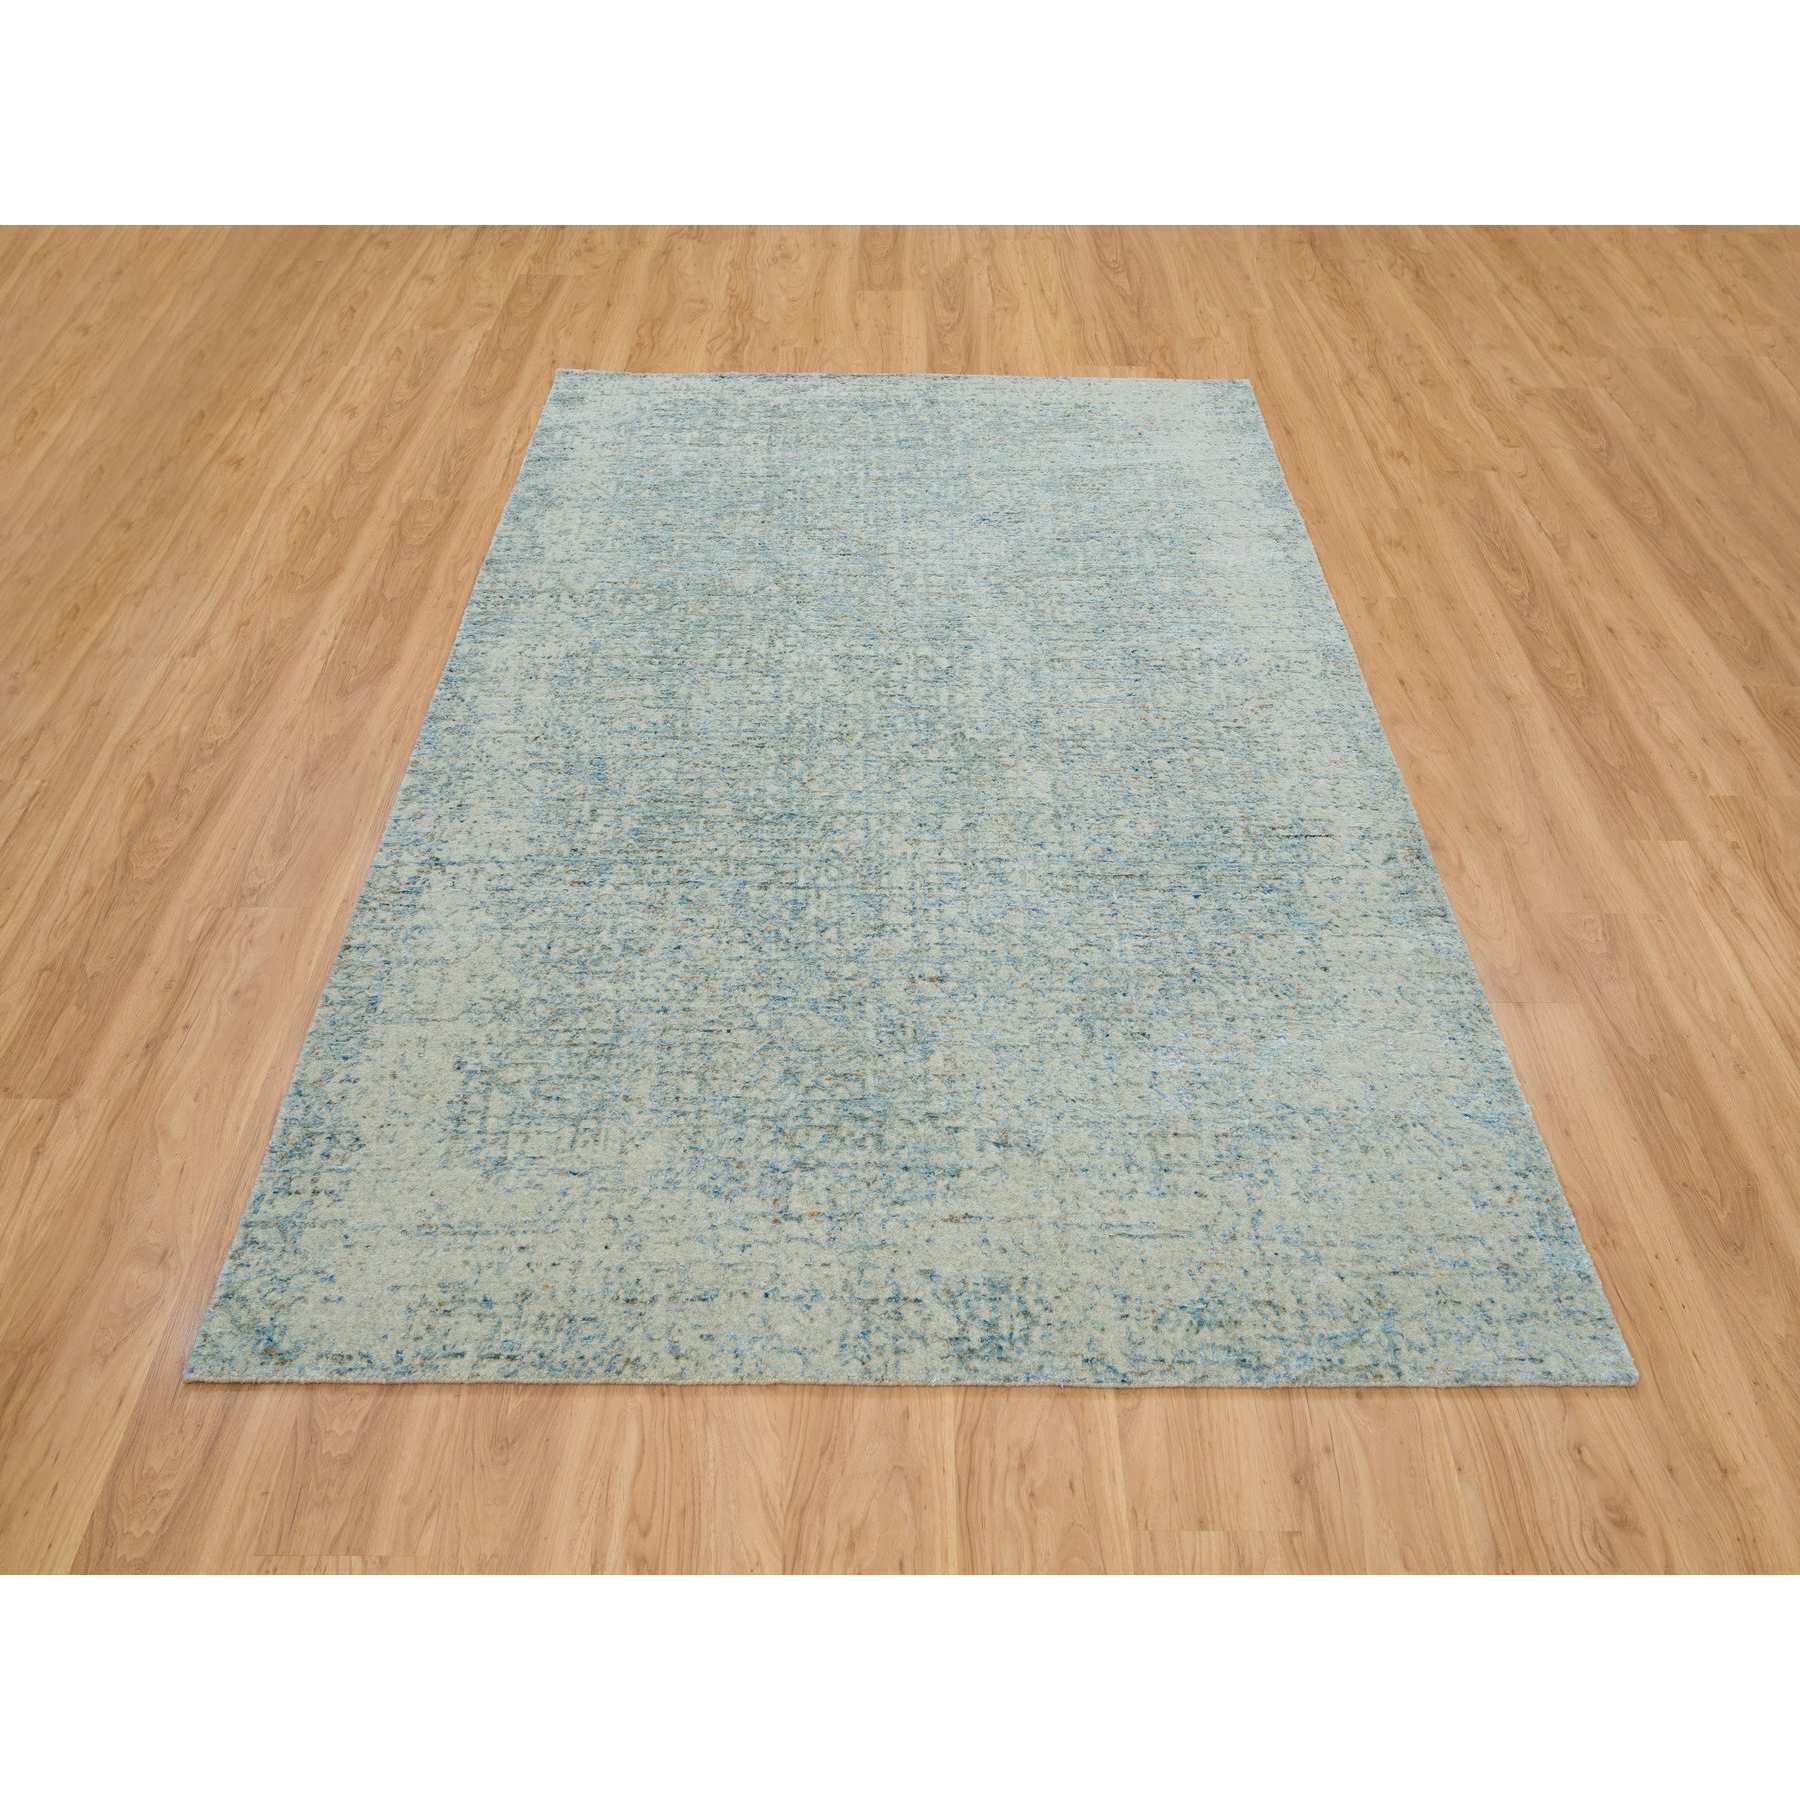 Modern-and-Contemporary-Hand-Loomed-Rug-325985